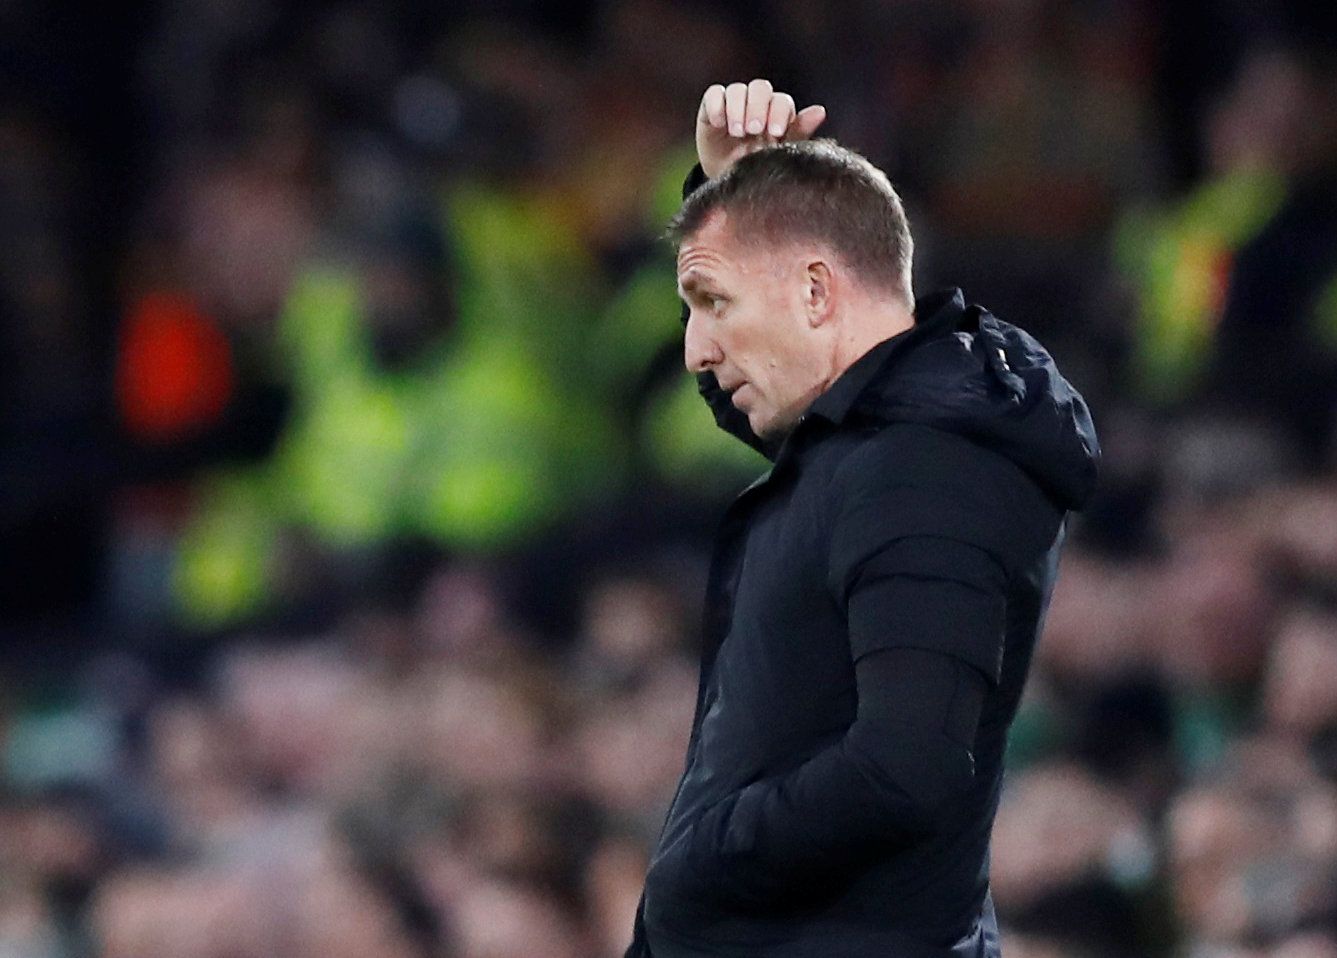 Soccer Football - Europa League - Round of 32 First Leg - Celtic v Valencia - Celtic Park, Glasgow, United Kingdom - February 14, 2019  Celtic manager Brendan Rodgers reacts  REUTERS/Russell Cheyne